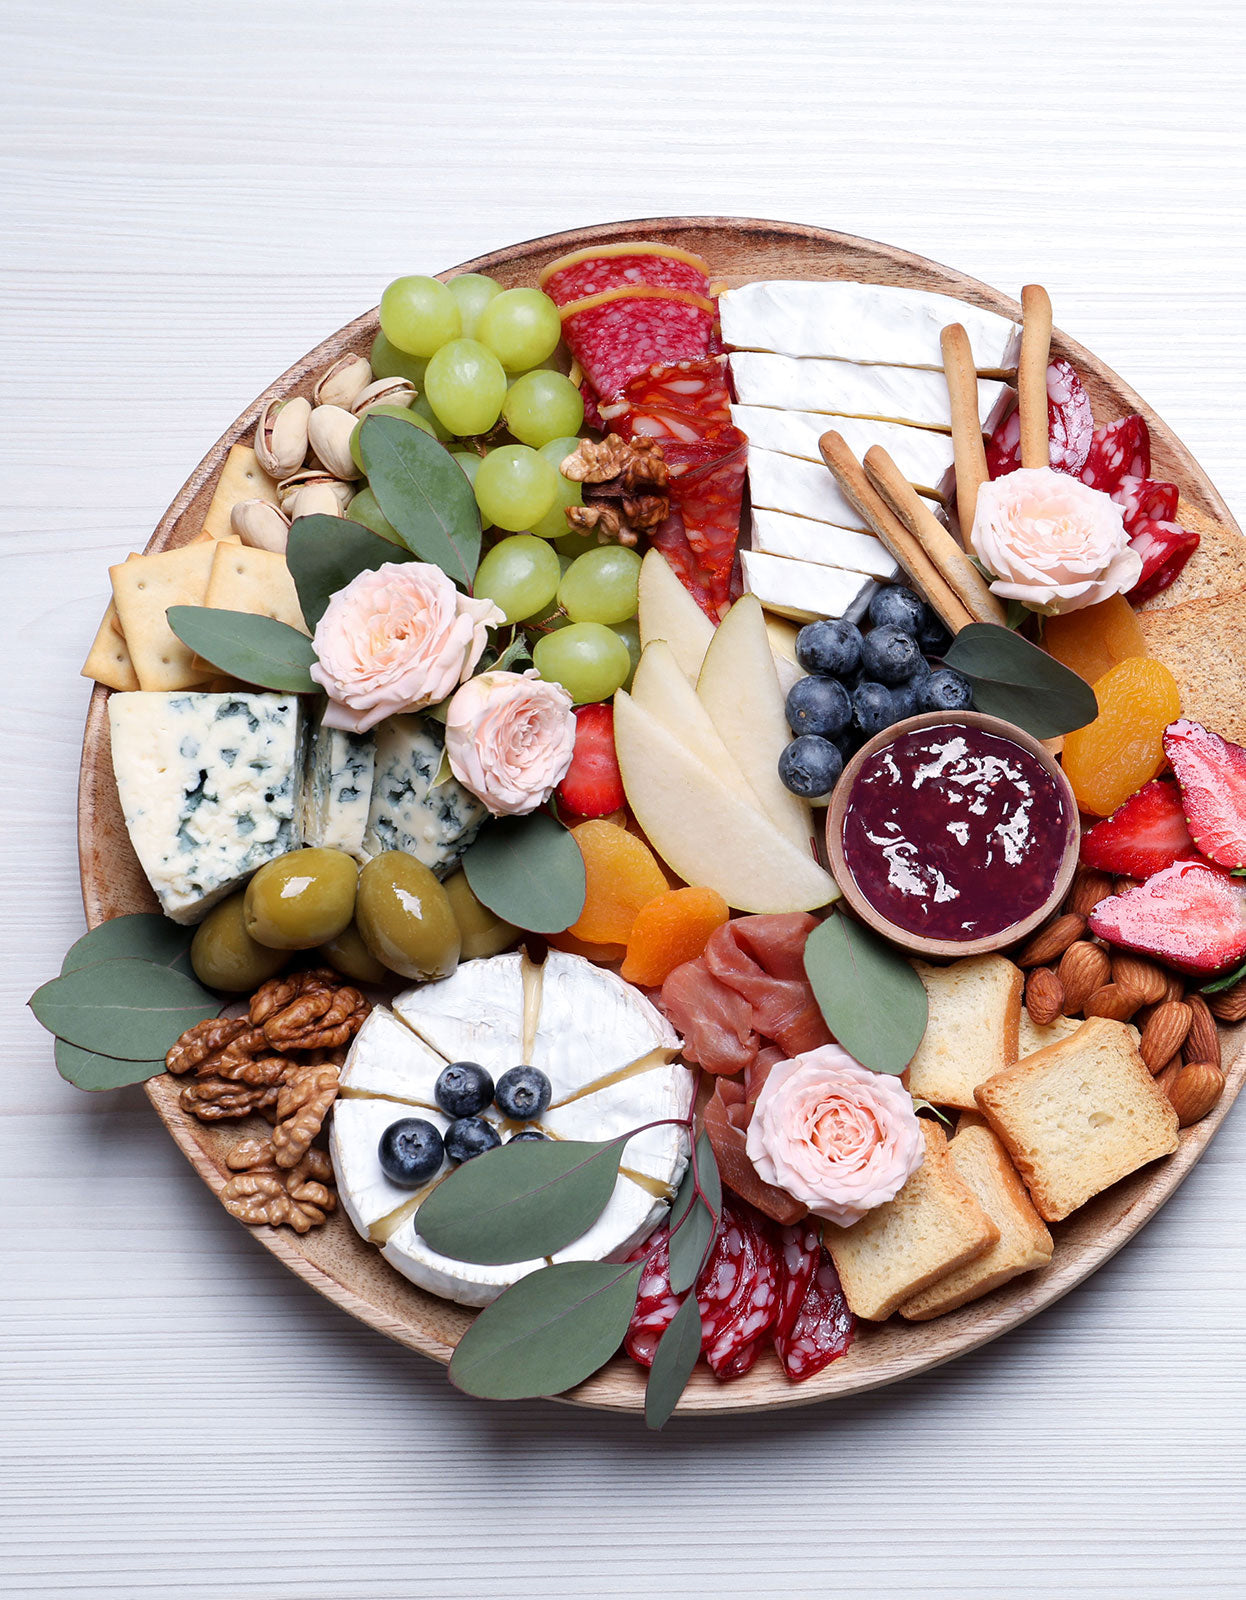 Gorgeous charcuterie board featuring an array of meats, cheeses, and fresh fruits, pairs with our organic rose petal jam.